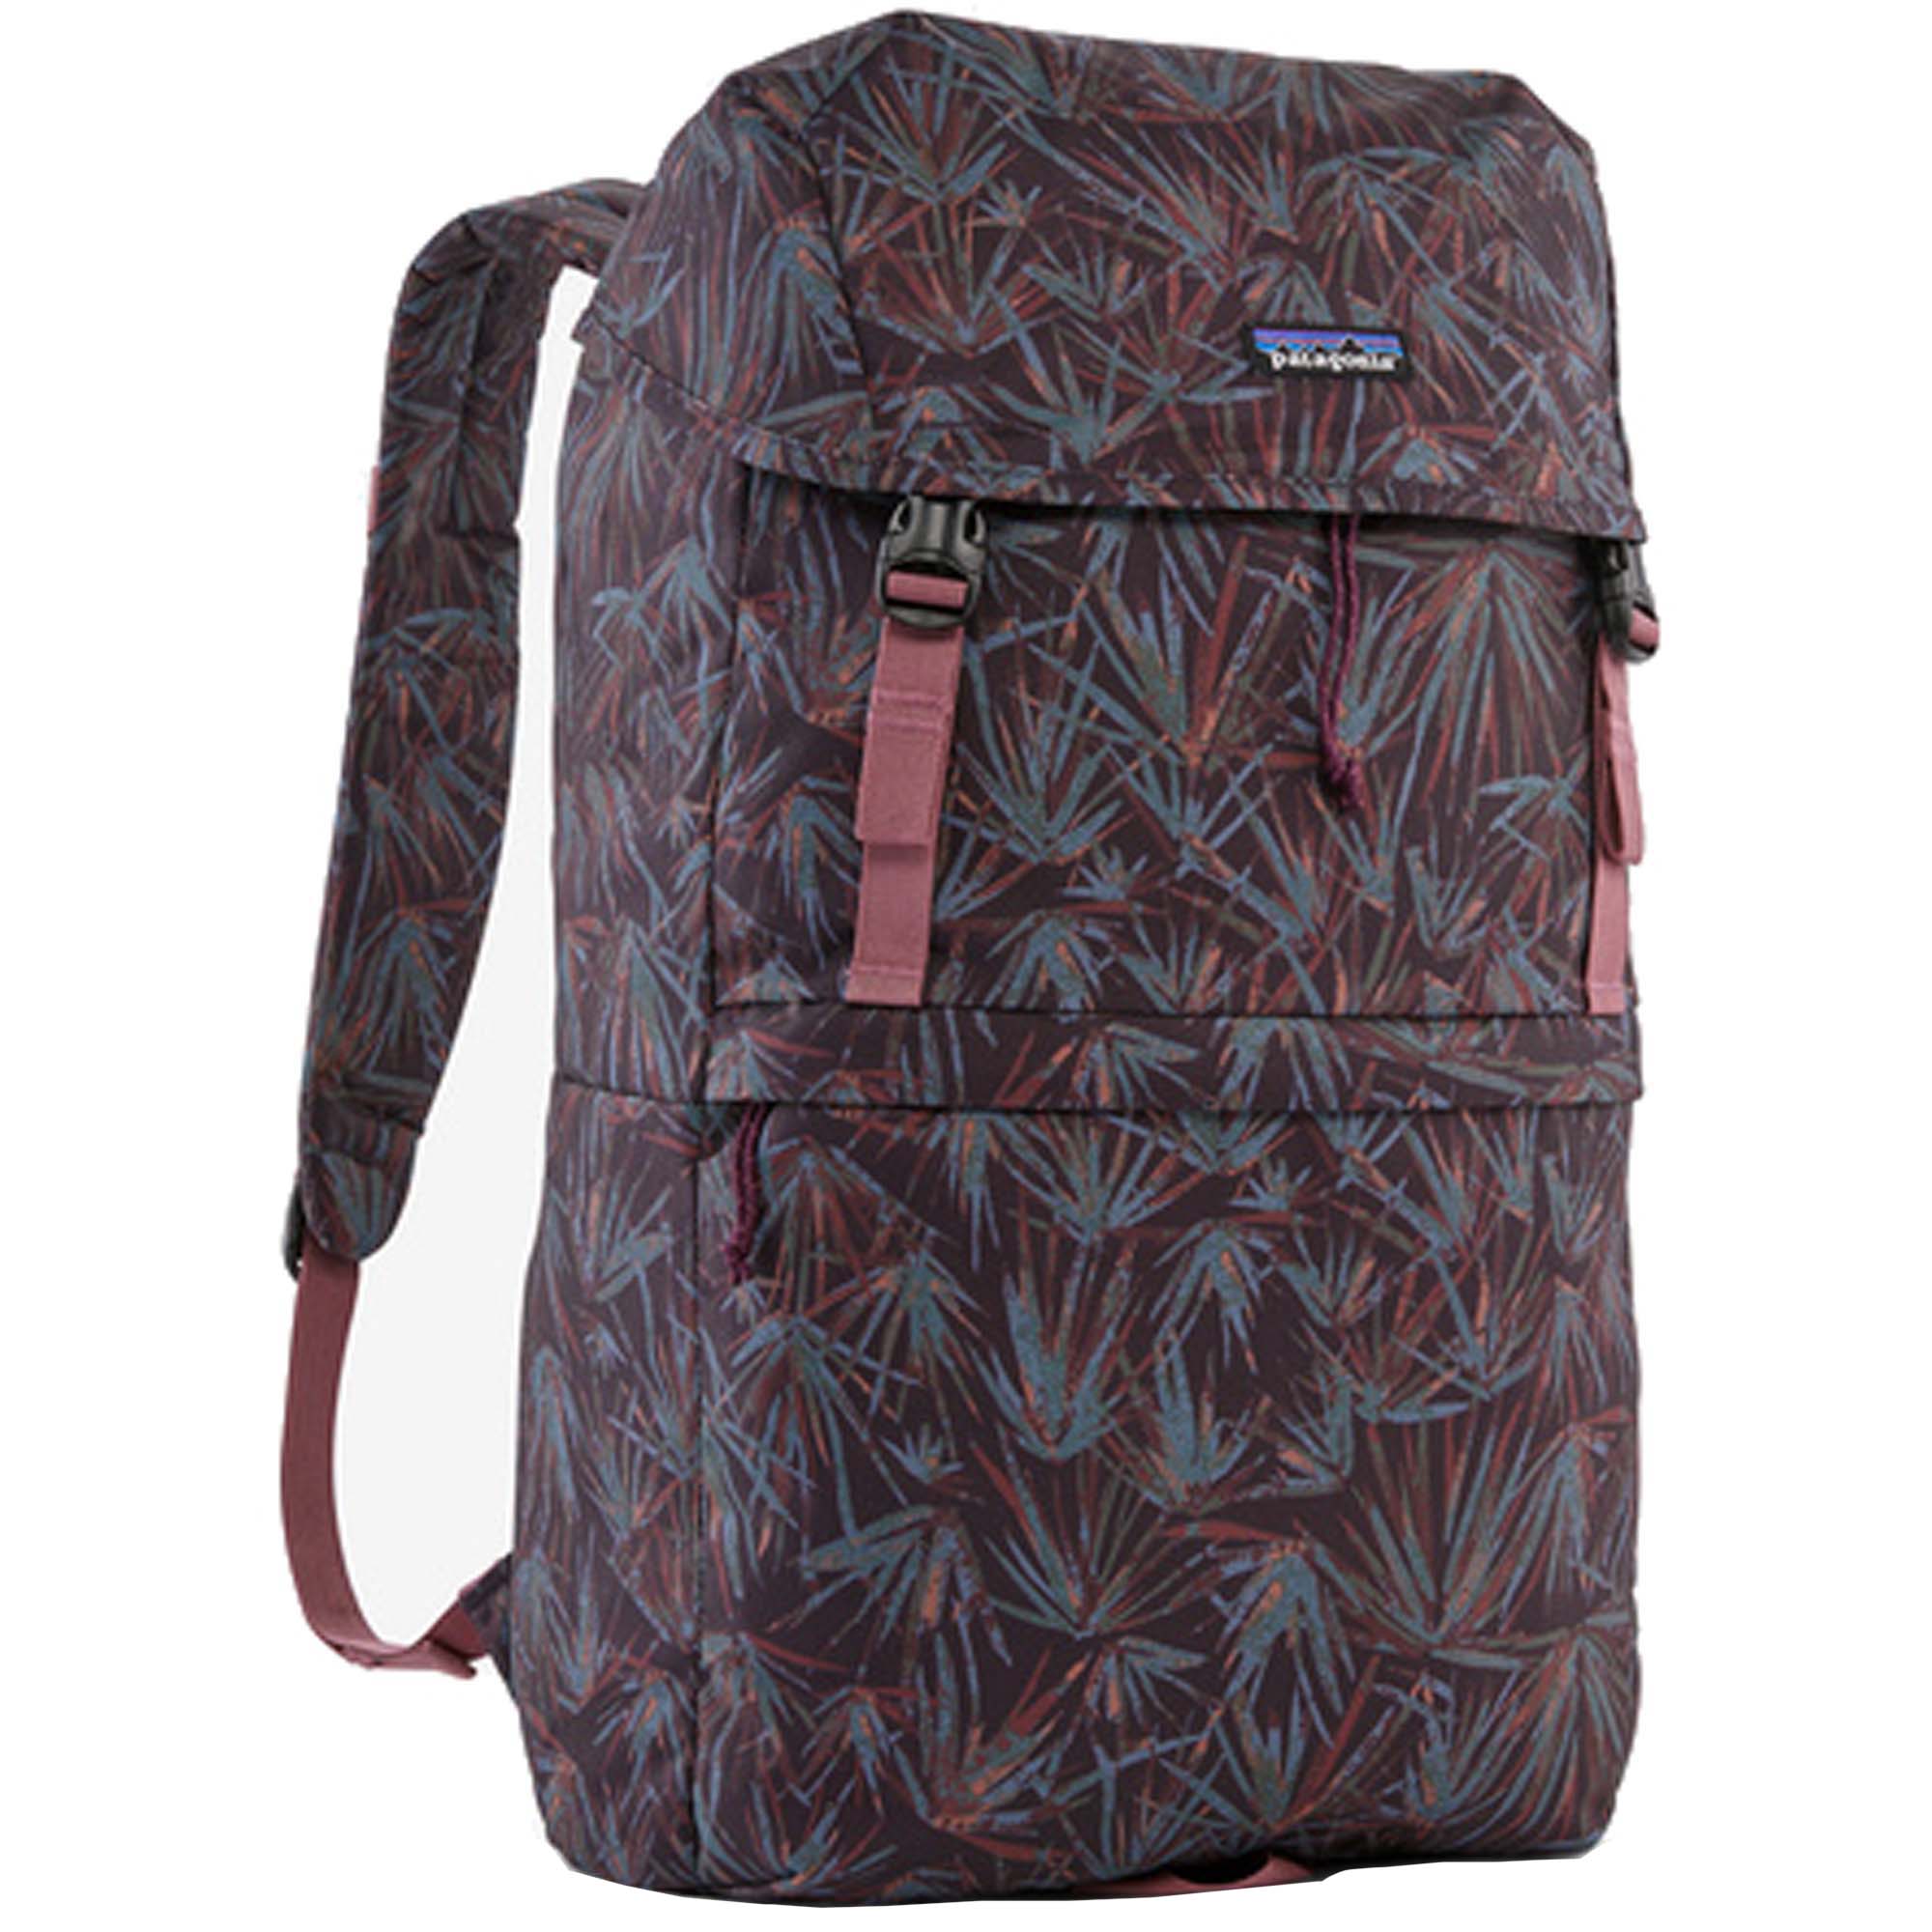 Photos - Backpack Patagonia Fieldsmith Lid 28 /Day Pack, 28L Night Plum 48546 